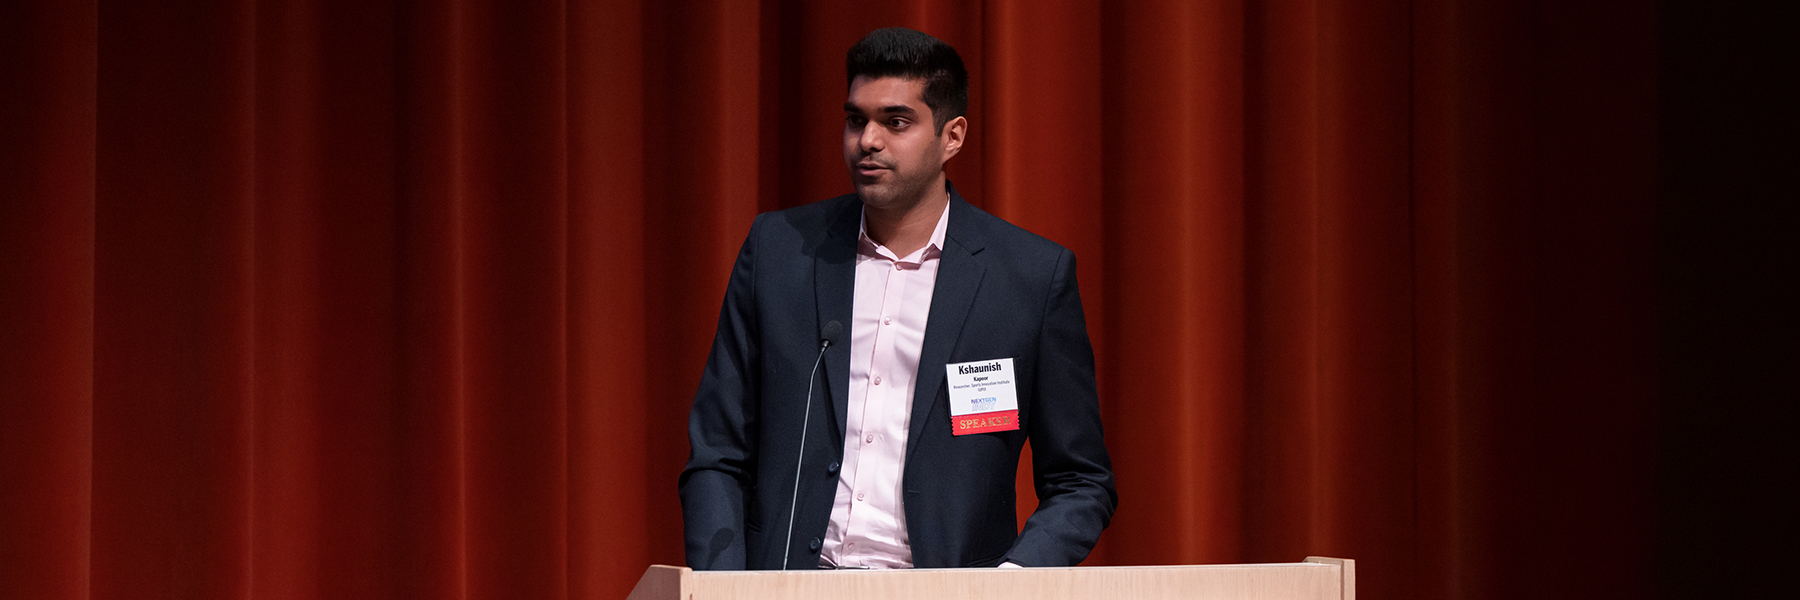 Research student Shaun Kapoor presents research project findings to IU Indianapolis audience. 